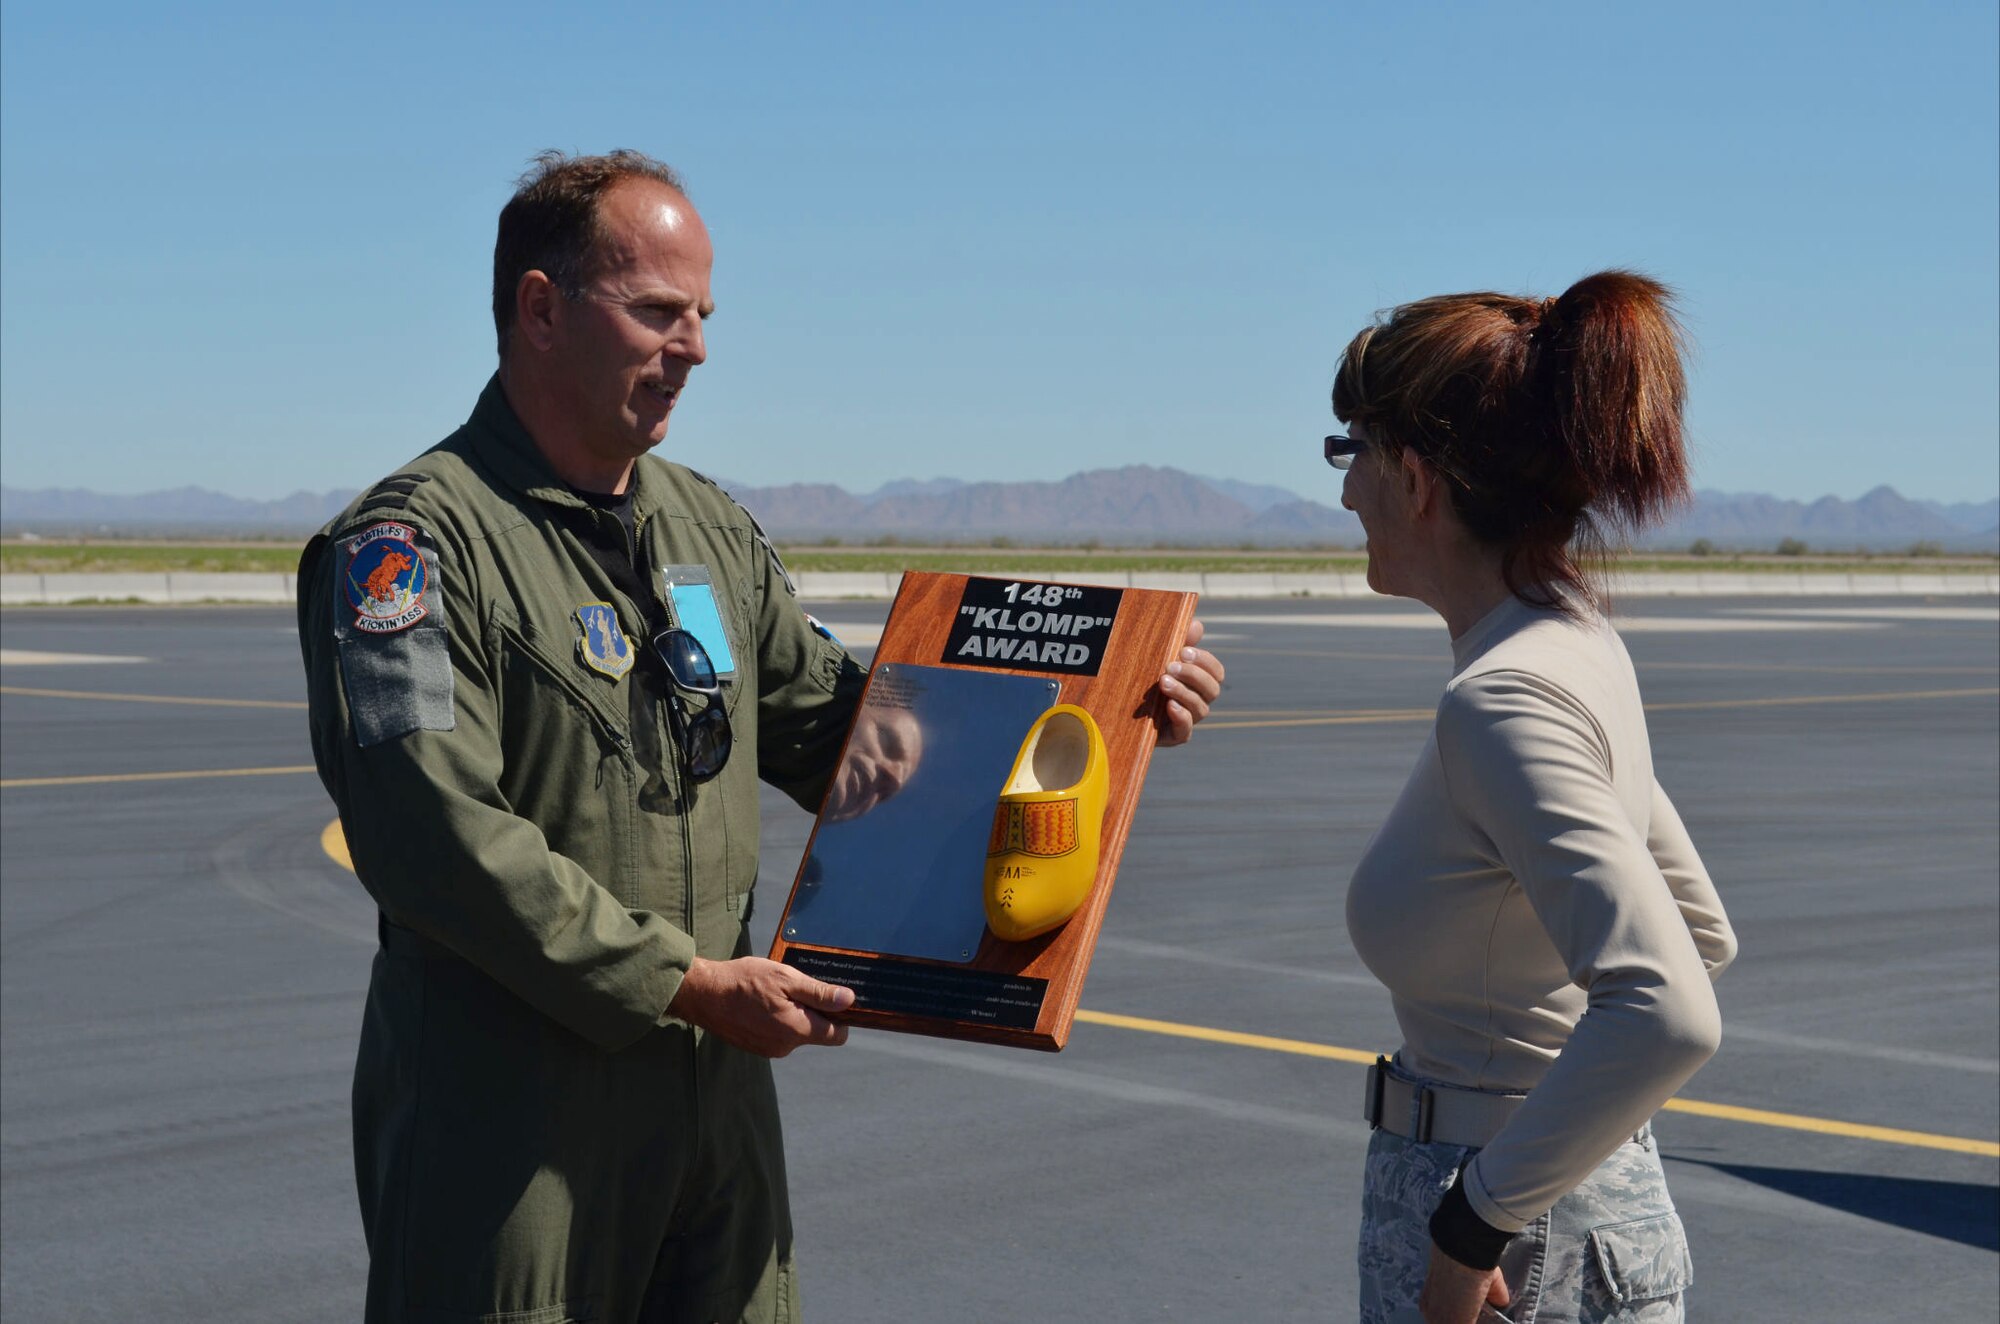 Lt. Col. Maurits Schonk, Netherlands Detachment Tucson Arizona (NDTA) commander (left), presents Staff Sgt. Elaine Broacha with the Klomp Award at the Gila Bend Air Force Auxiliary Field, March 11, 2013. Broacha was recognized for her contributions to an annual training mission for Dutch demonstration pilots. (U.S. Air Force photo by WO Danny van der Molen /Released.)